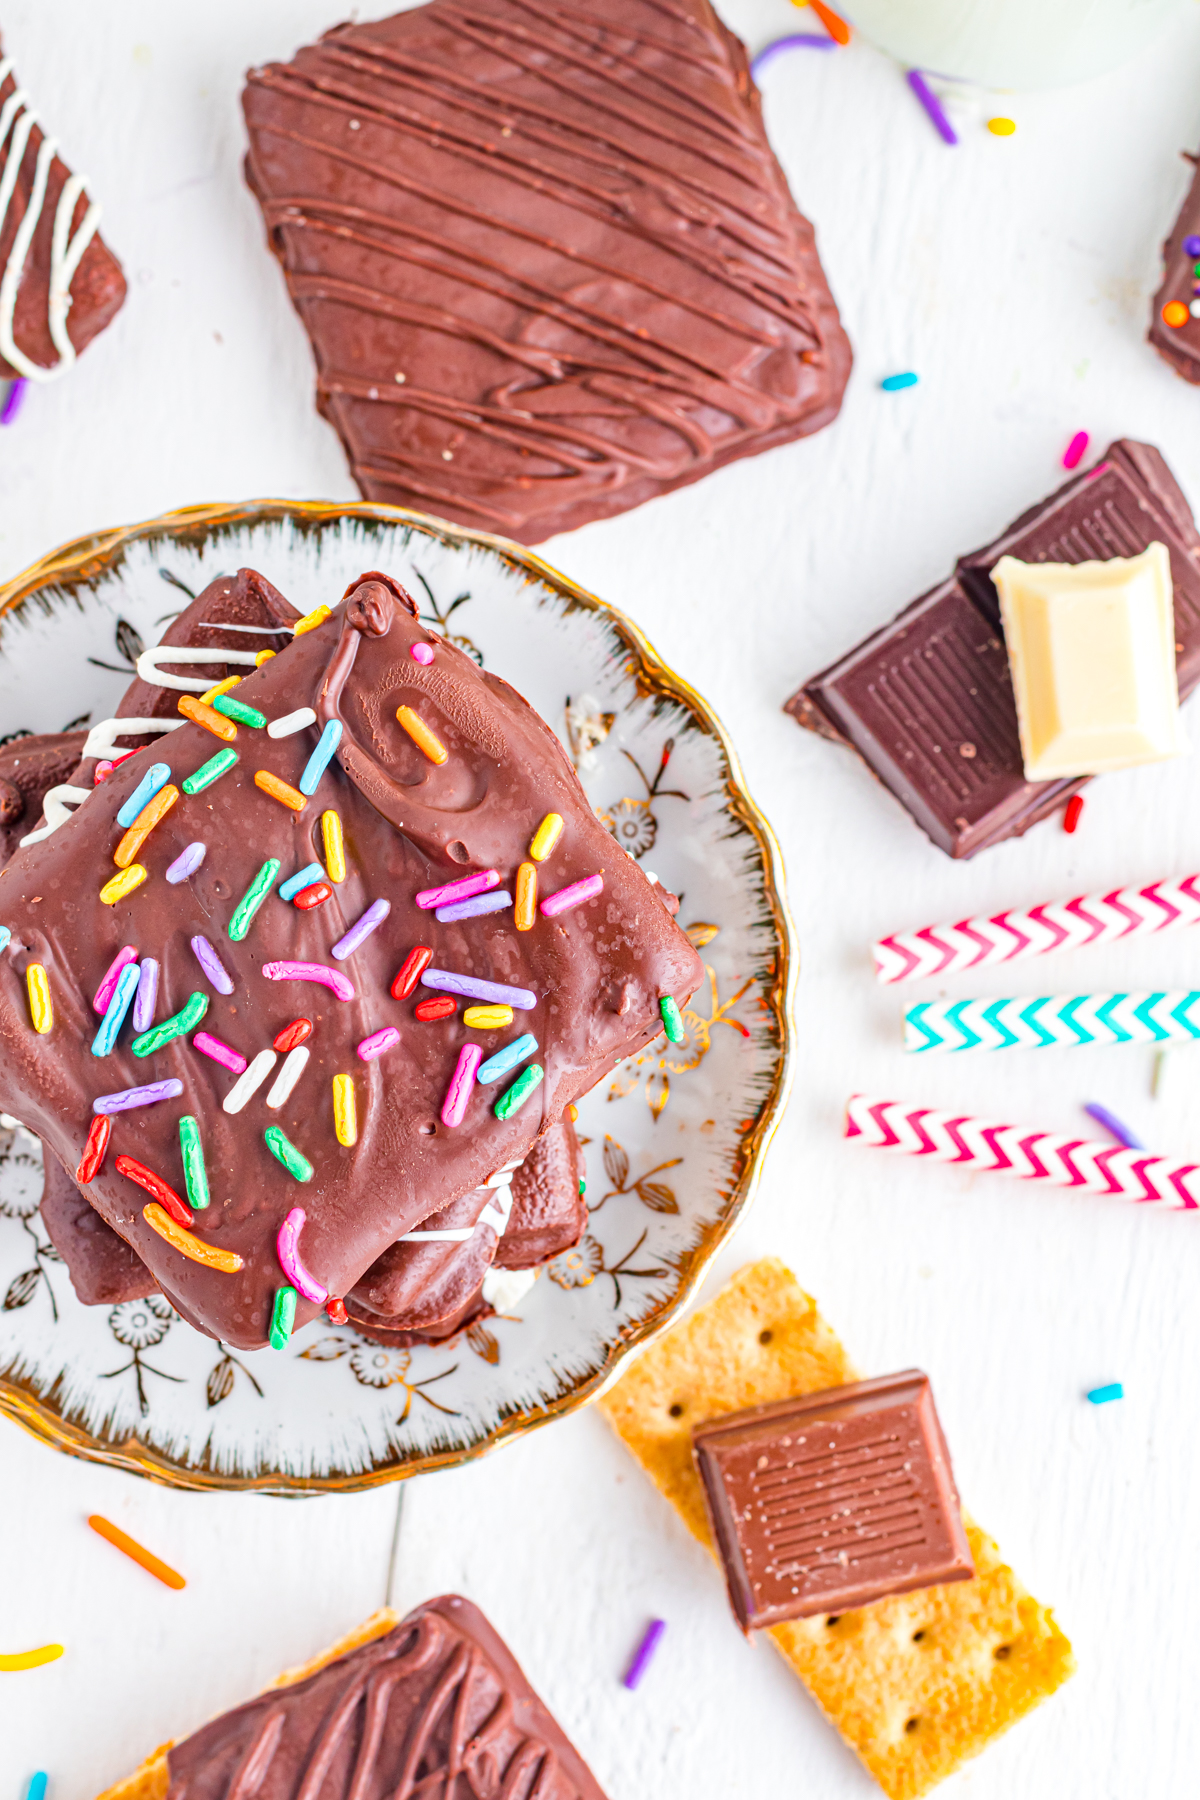 Chocolate dipped graham crackers with sprinkles on top.